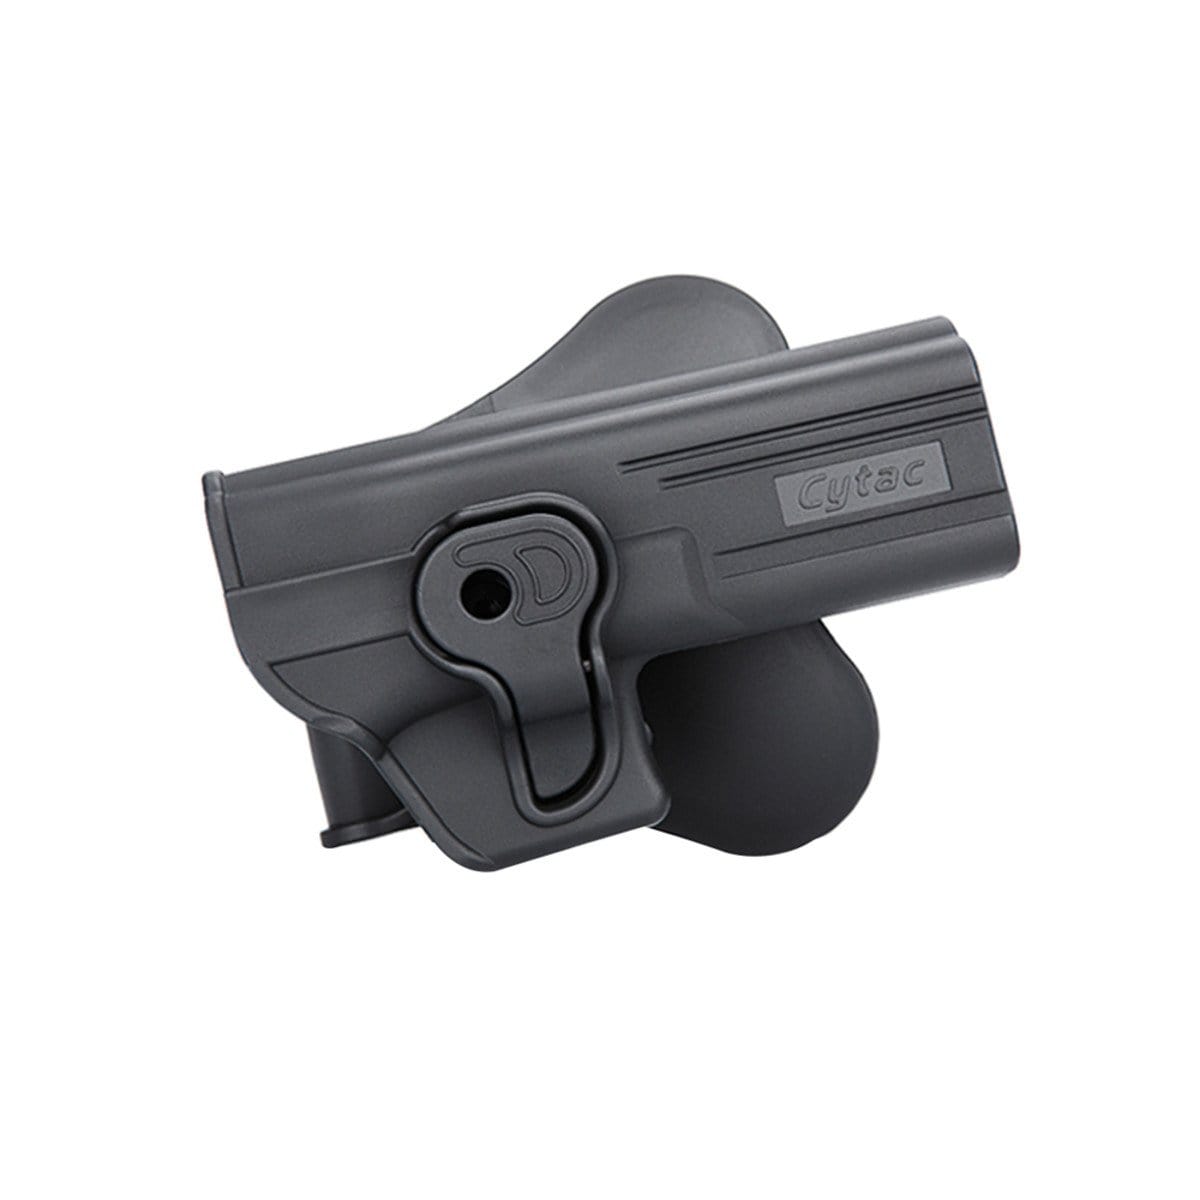 Cytac Hard Shell Fast Draw Holster (Model: Glock 17 22 31 / Paddle Mount) - Eminent Paintball And Airsoft